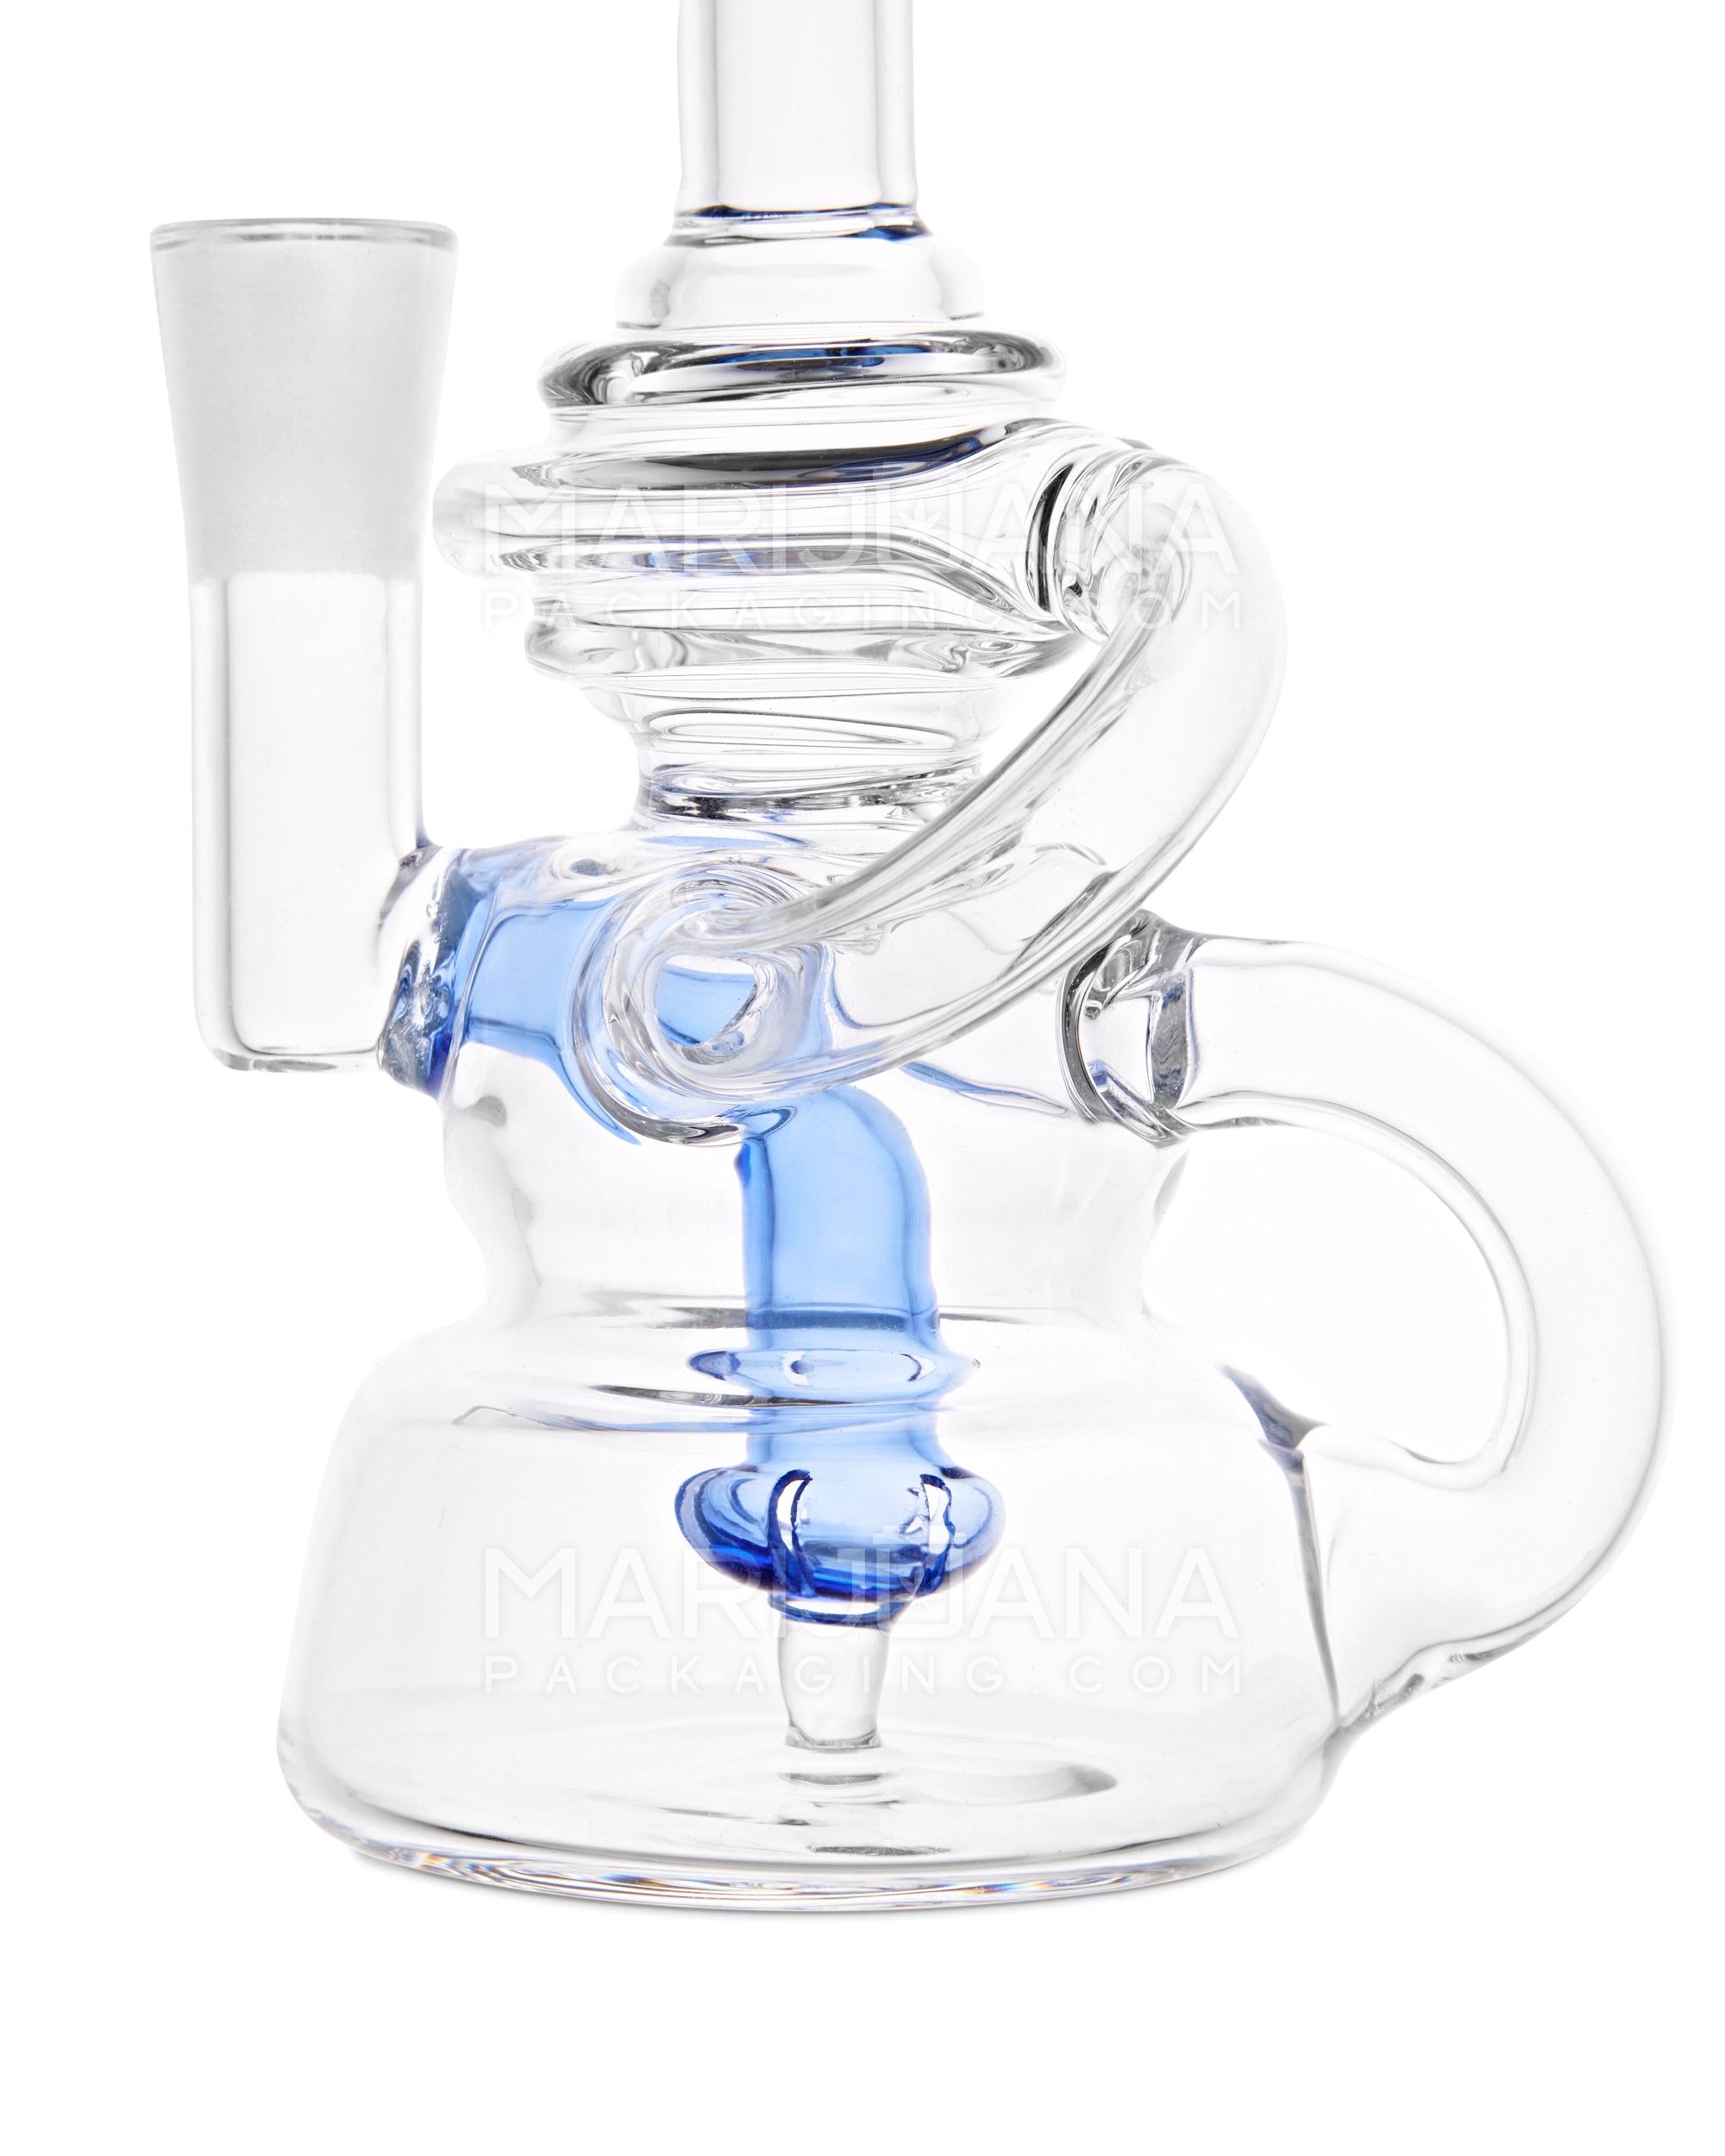 USA Glass | Bent Neck Single Uptake Recycler Water Pipe w/ Orb Perc | 5.5in Tall - 10mm Bowl - Blue